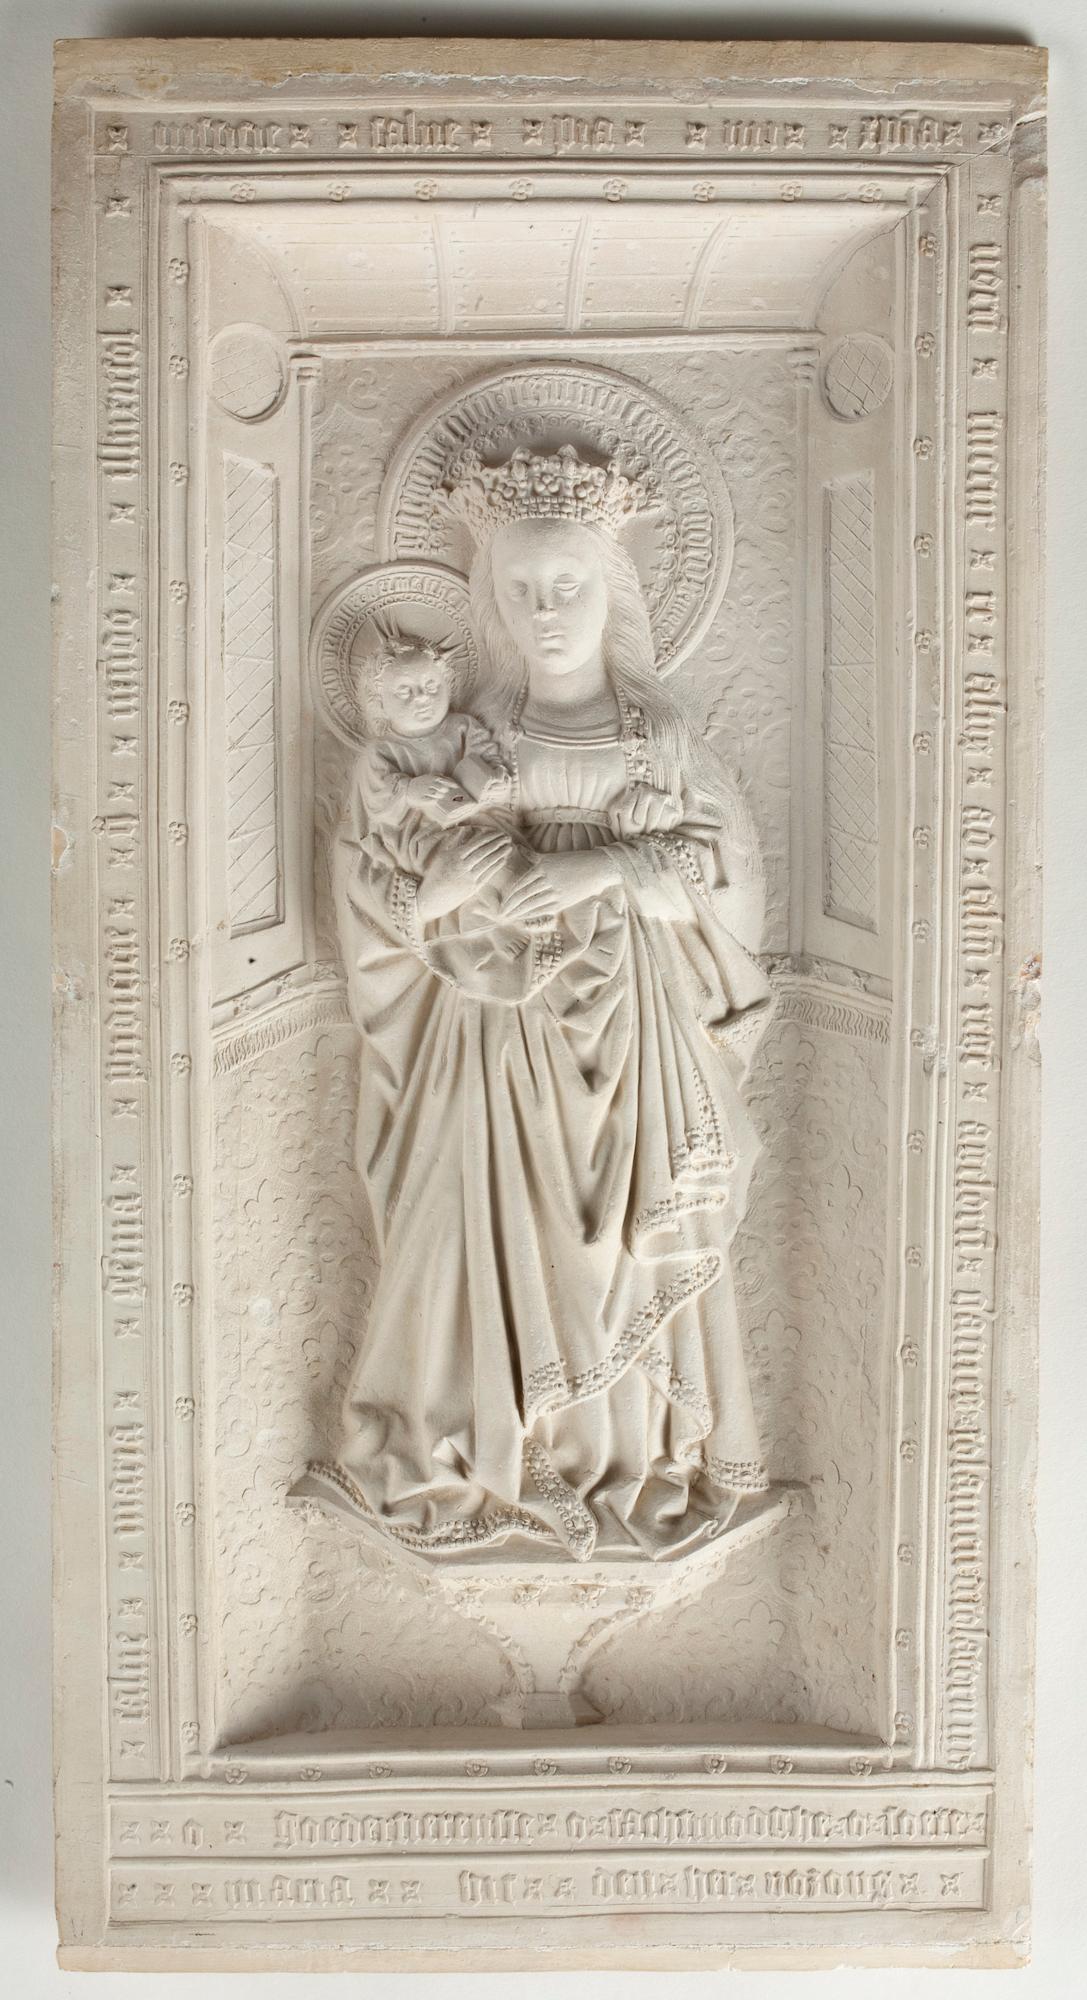 “Relief with the Virgin and Child" ("The Virgin of Zoeterwoude"), second half of 15th century, by an unknown artist from Utrecht. Pipe clay, 16 13/16 inches by 8 11/16 inches by 1 inch. Museum Catharijneconvent. (The Frick Collection)